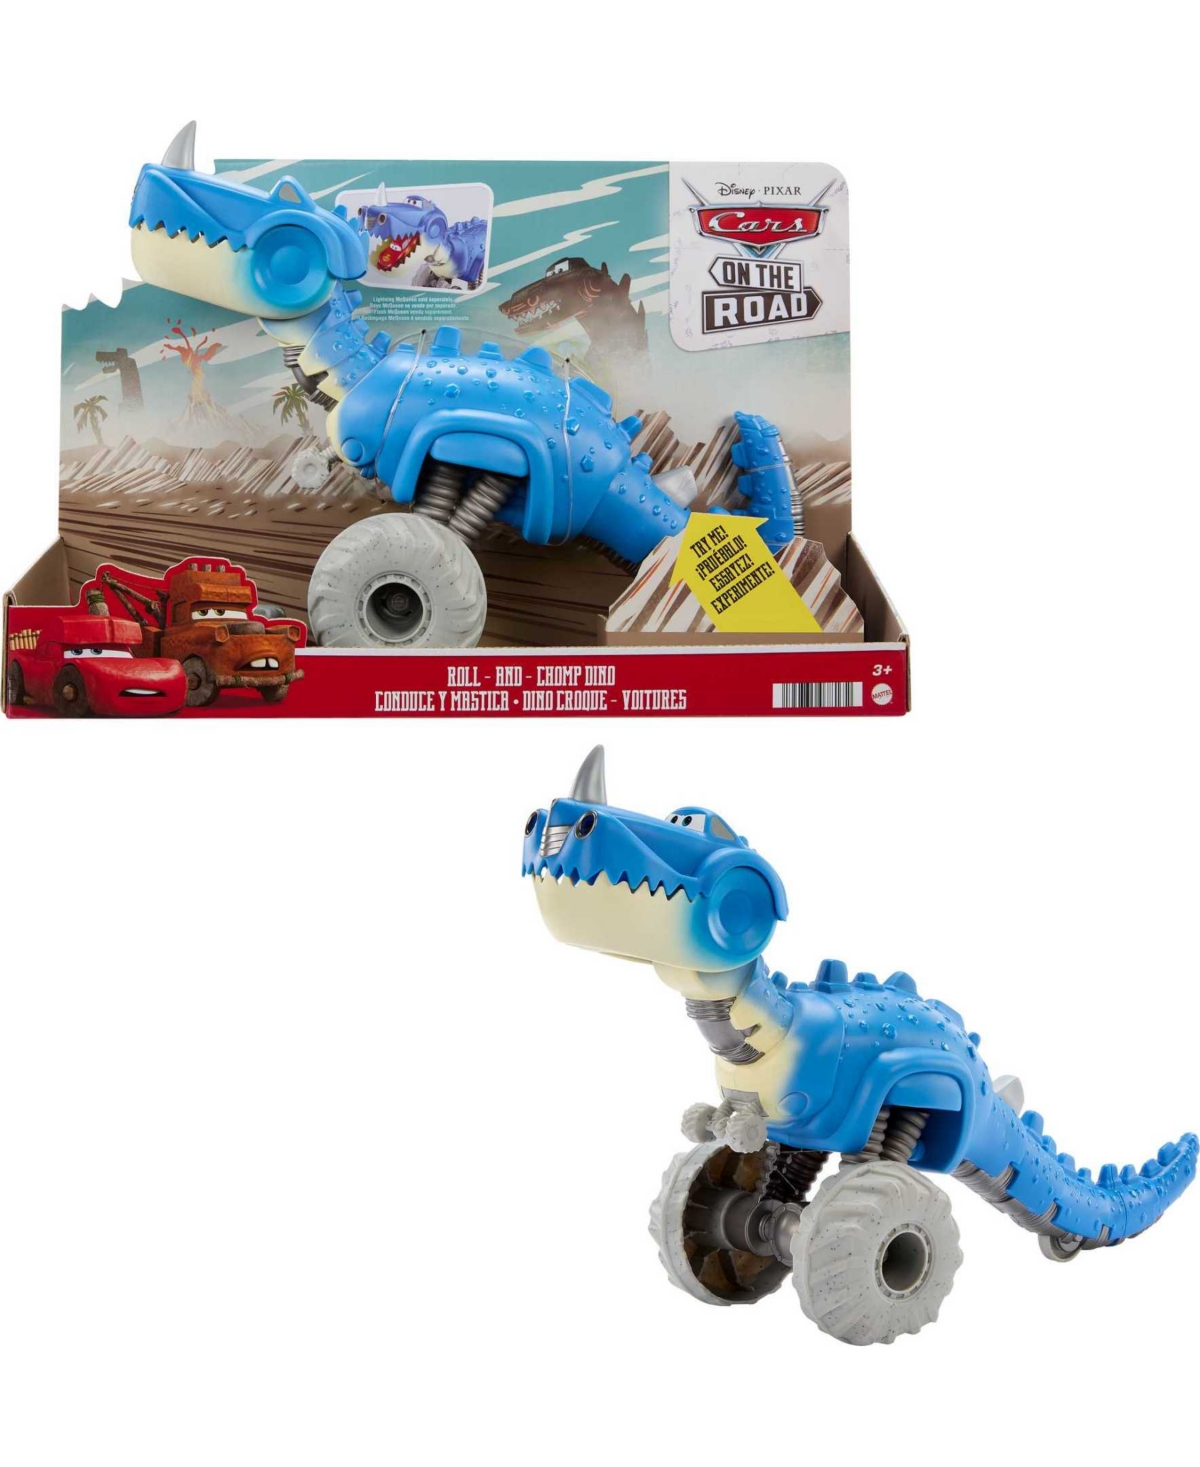 Disney Pixar Babies' Cars On The Road Dinosaur Toy Vehicle That Eats Cars In Multi-color